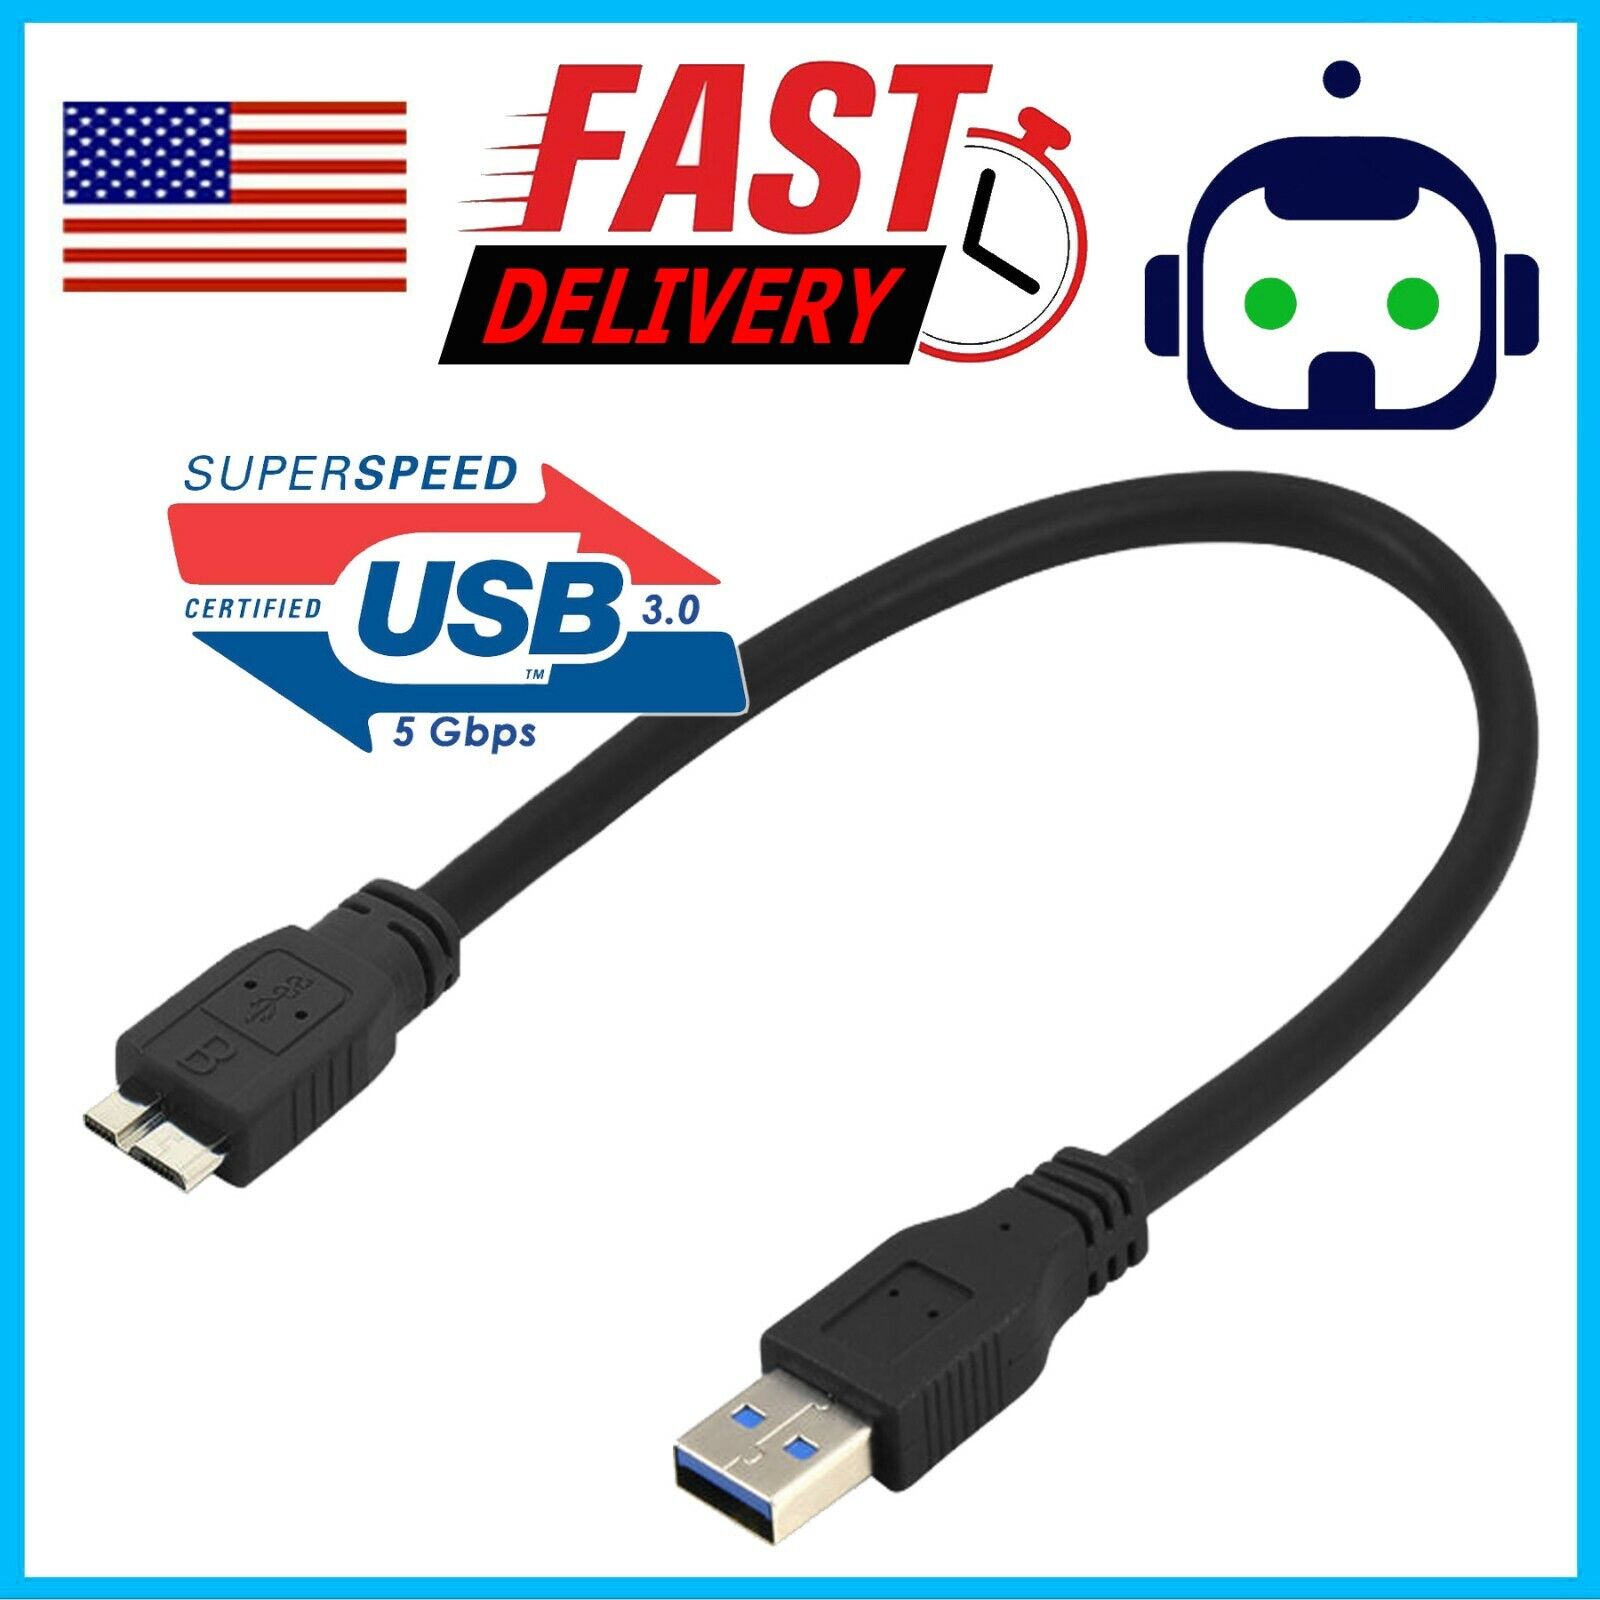 USB 3.0 CABLE CORD FOR SEAGATE BACKUP PLUS SLIM PORTABLE EXTERNAL HARD DRIVE HDD